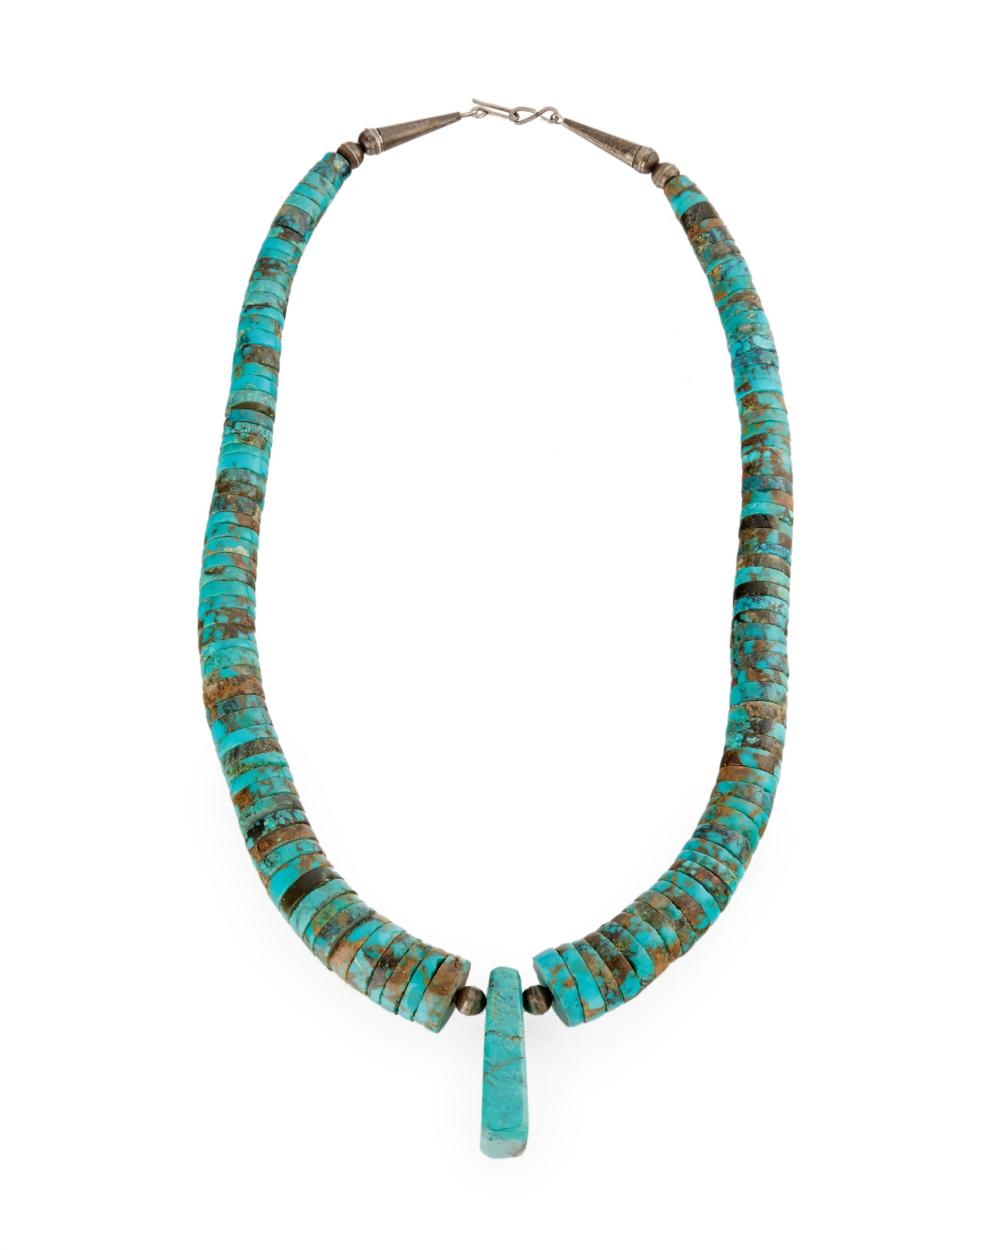 A TURQUOISE BEAD NECKLACEA turquoise